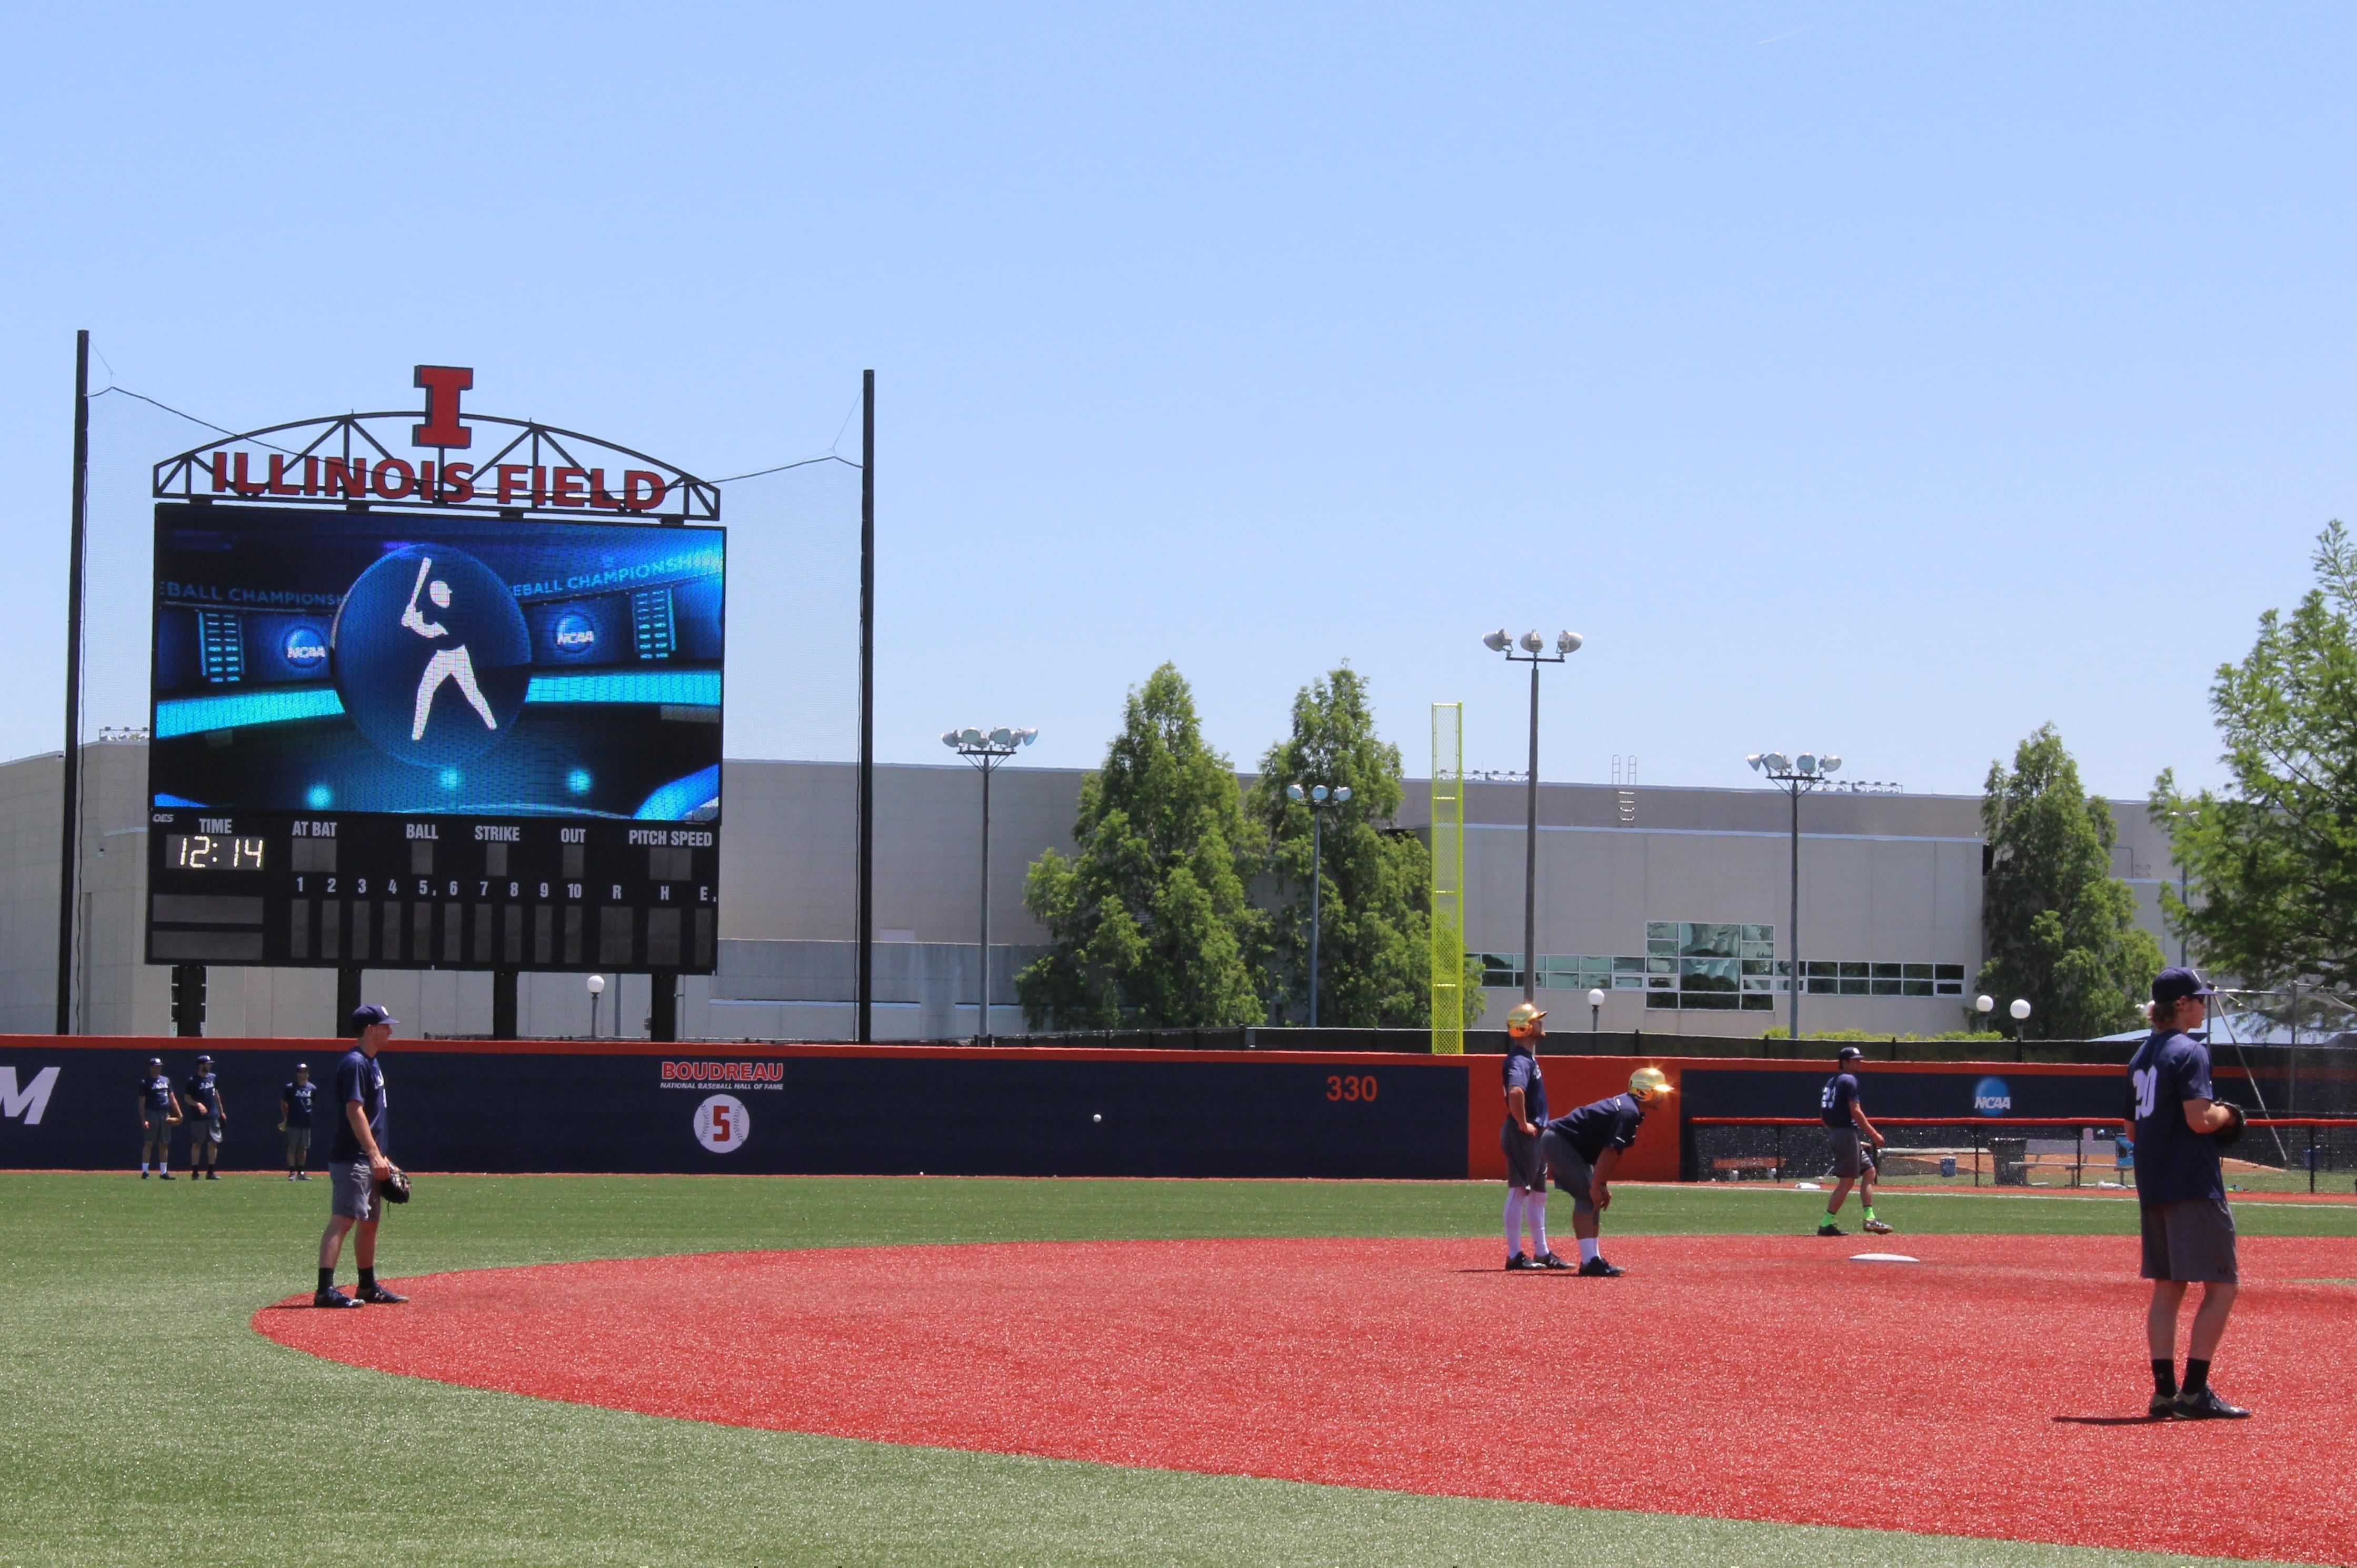 The Notre Dame baseball team practices at Illinois Field in Champaign Thursday.  The stadium's first-ever NCAA Regional begins Friday.